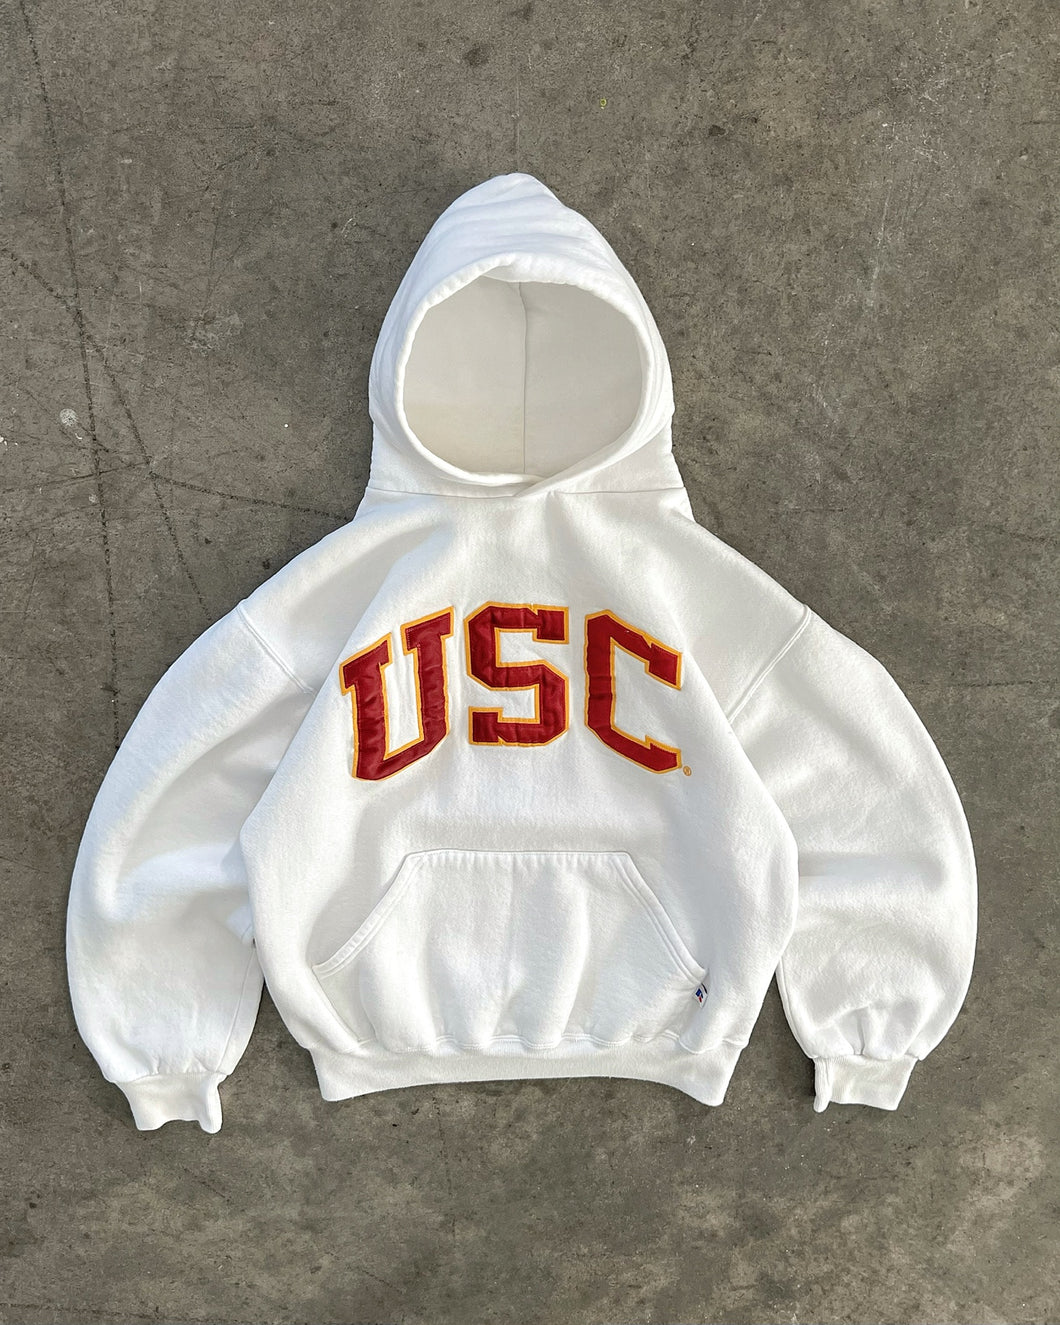 CLOUD WHITE “USC” RUSSELL HOODIE - 1990S